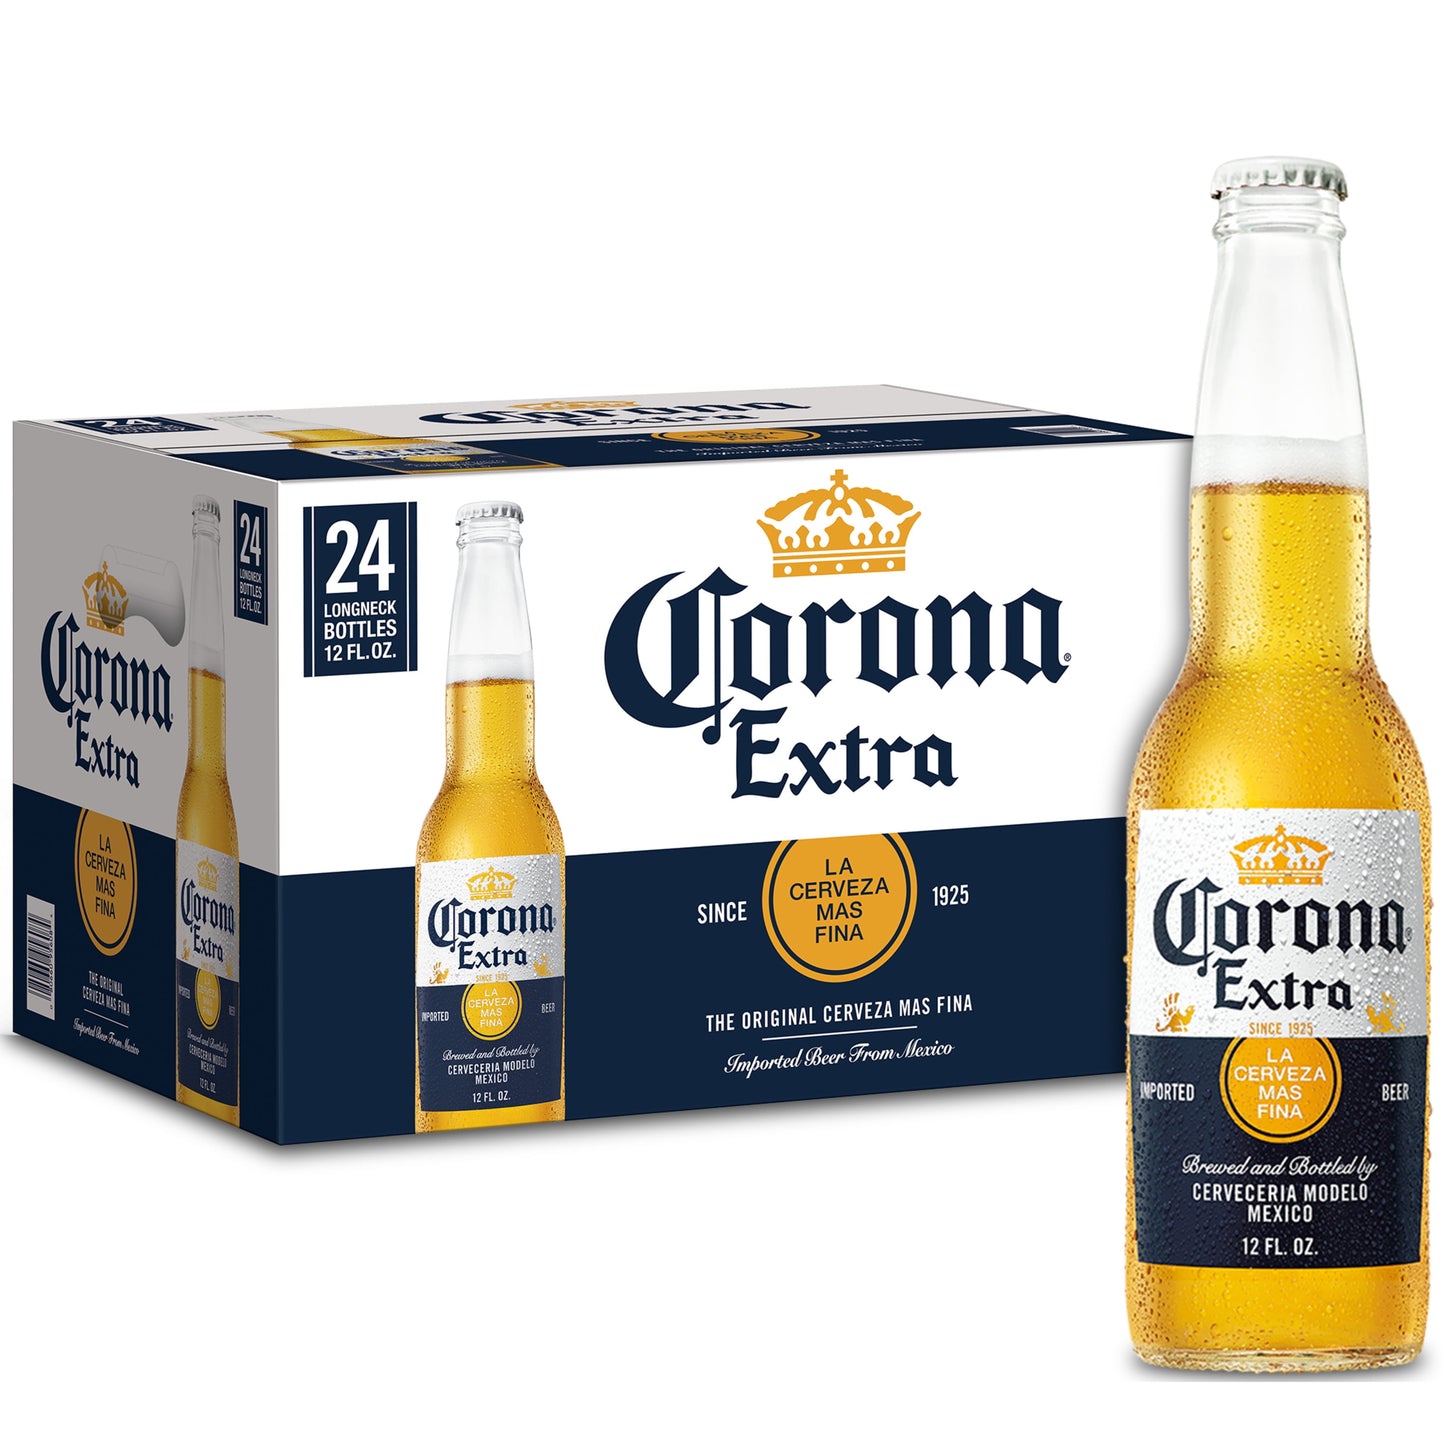 Corona Extra Mexican Lager Import Beer, 24 Pack Beer, 12 fl oz Bottles, 4.6% ABV